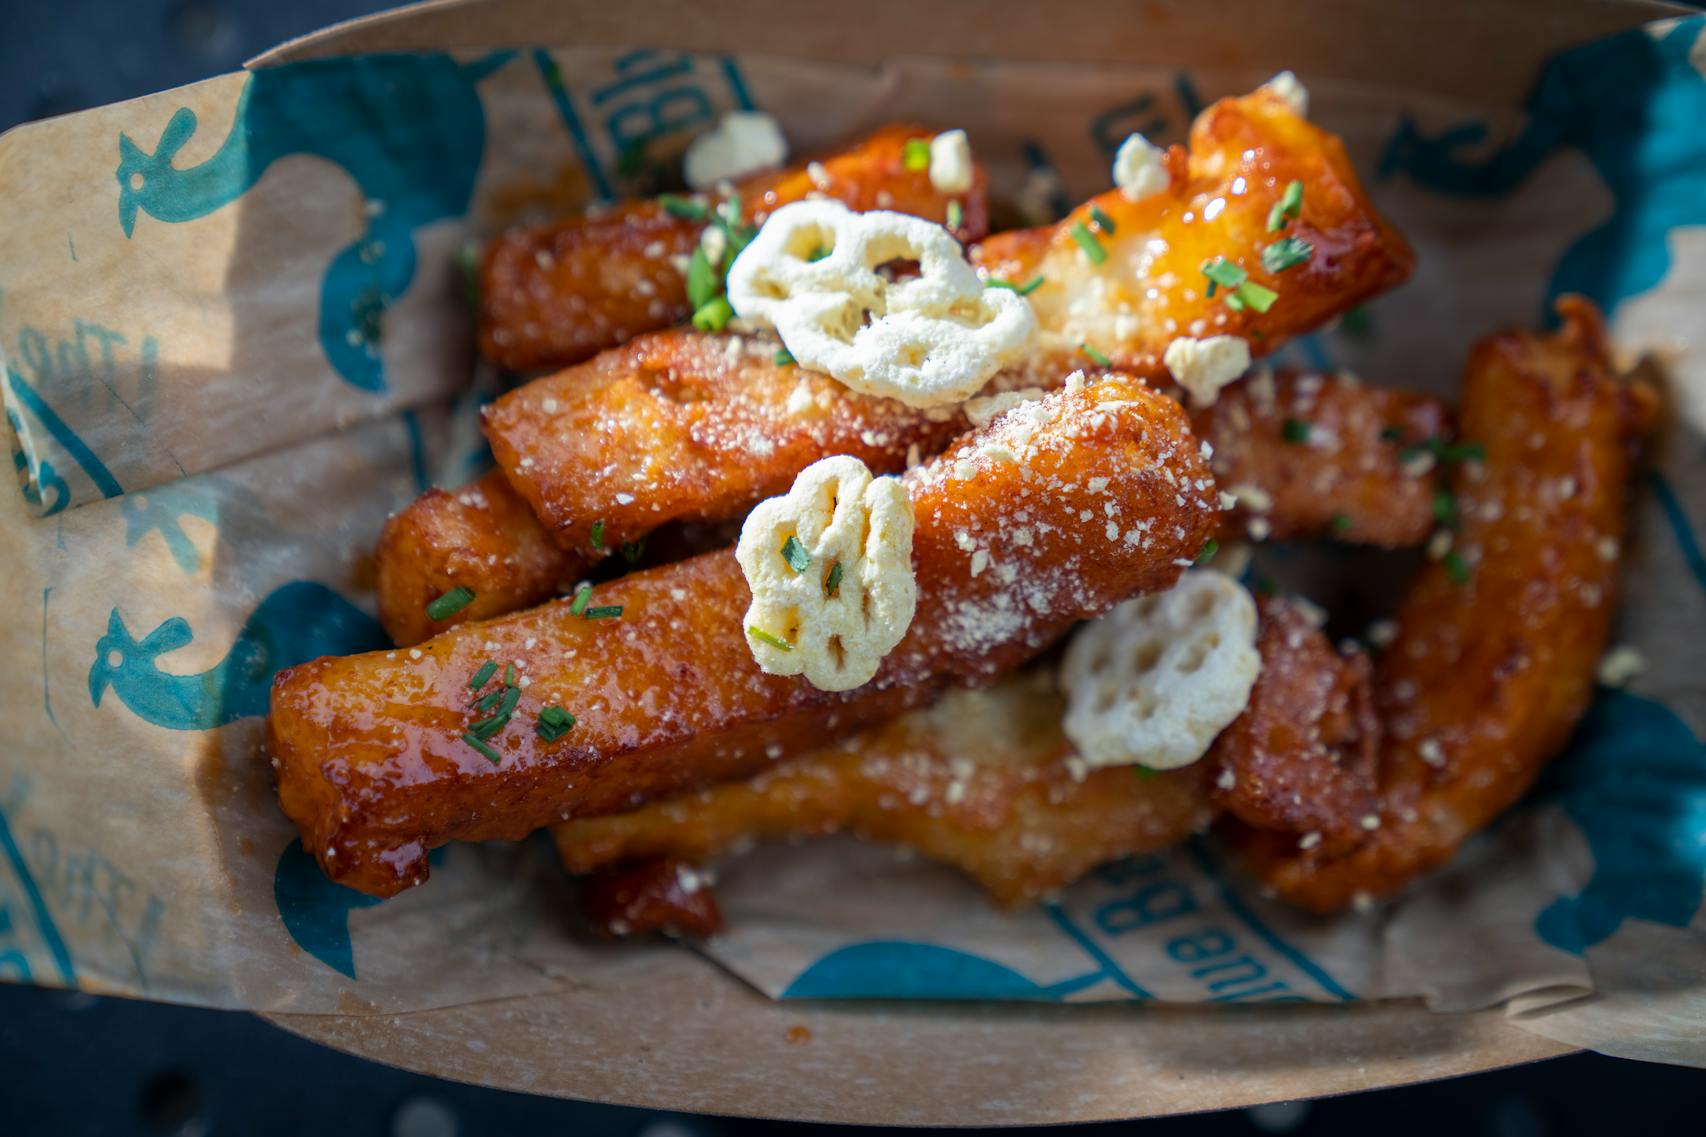 Hot Honey Cheese Sticks from Blue Barn. The new foods of the 2023 Minnesota State Fair photographed on the first day of the fair in Falcon Heights, Minn. on Tuesday, Aug. 8, 2023. ] LEILA NAVIDI • leila.navidi@startribune.com